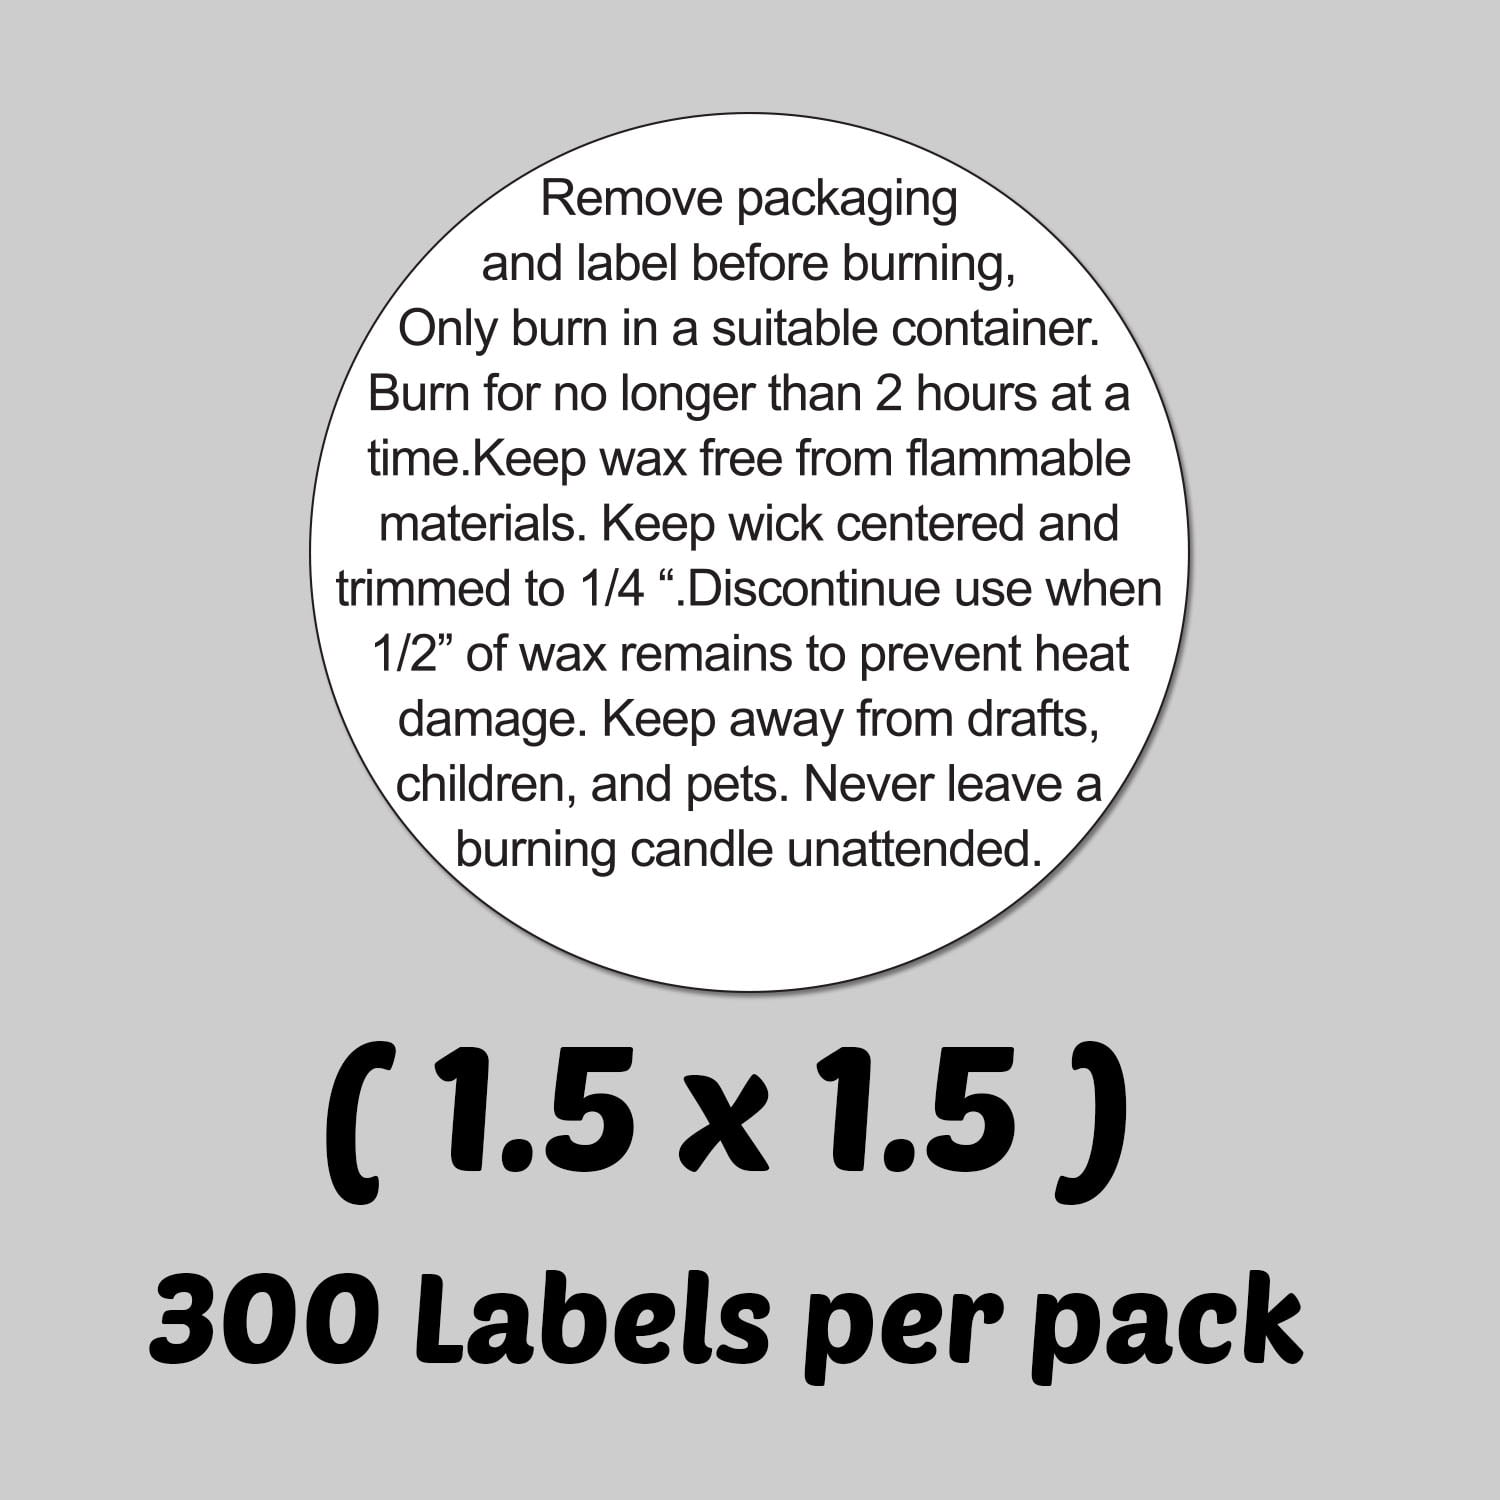 Round Candle Warning Stickers 1 5 Inch 300 Stickers Per Roll White Black For Retail Packaging Walmart Com Walmart Com